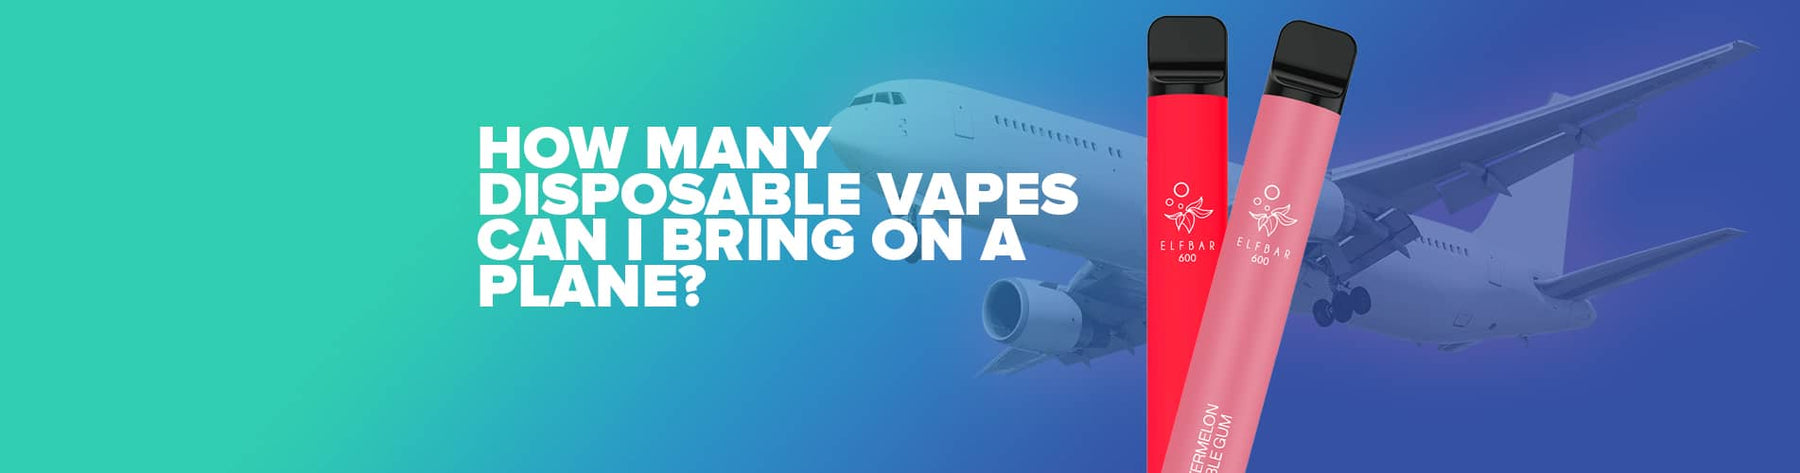 How Many Disposable Vapes Can I Bring On A Plane?